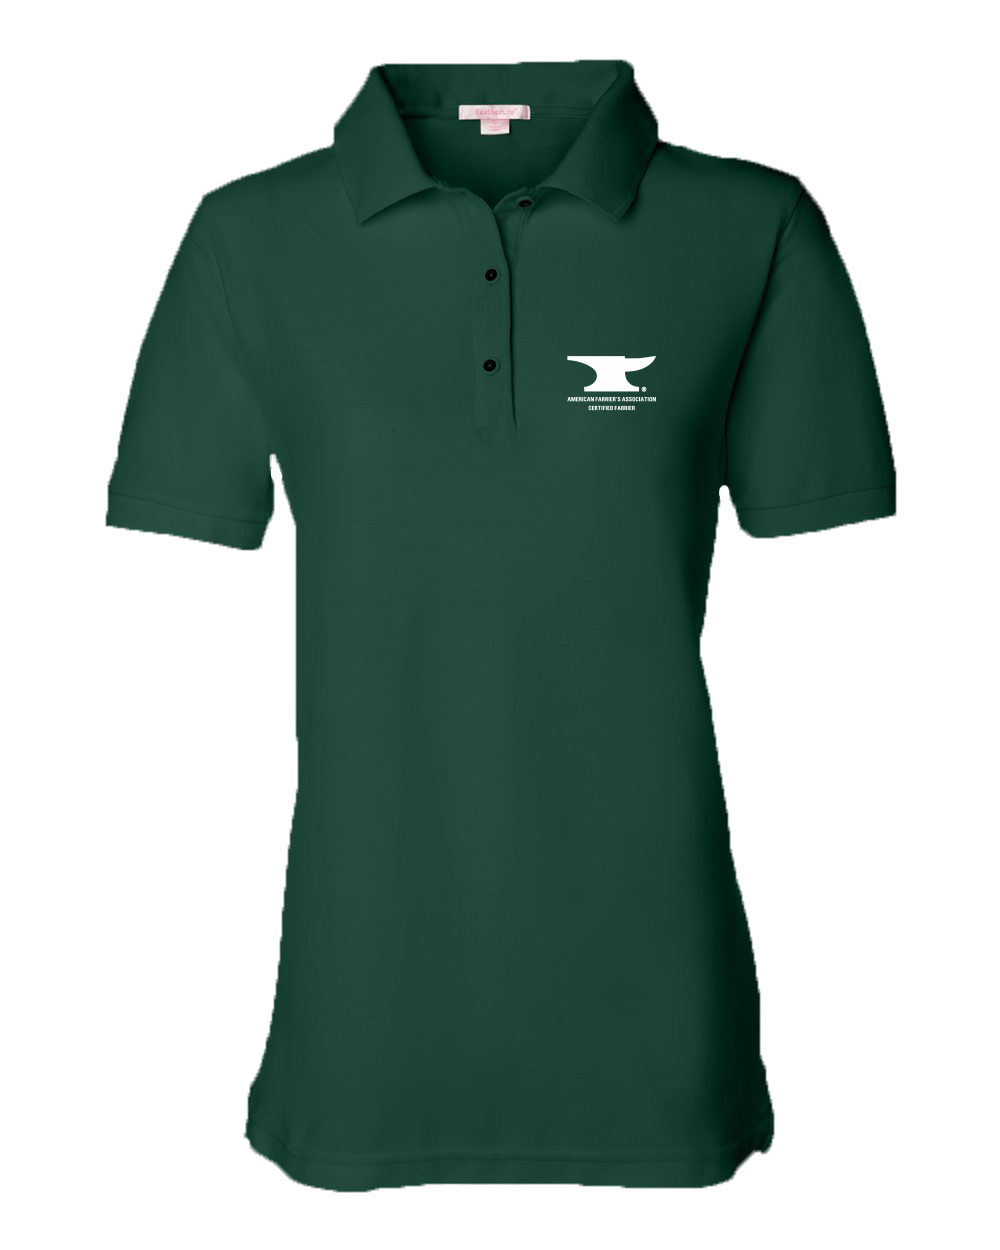 Ladies Pique Polo Forest Green Men's or Ladies' Short Sleeve AFA Certified Farrier Polo